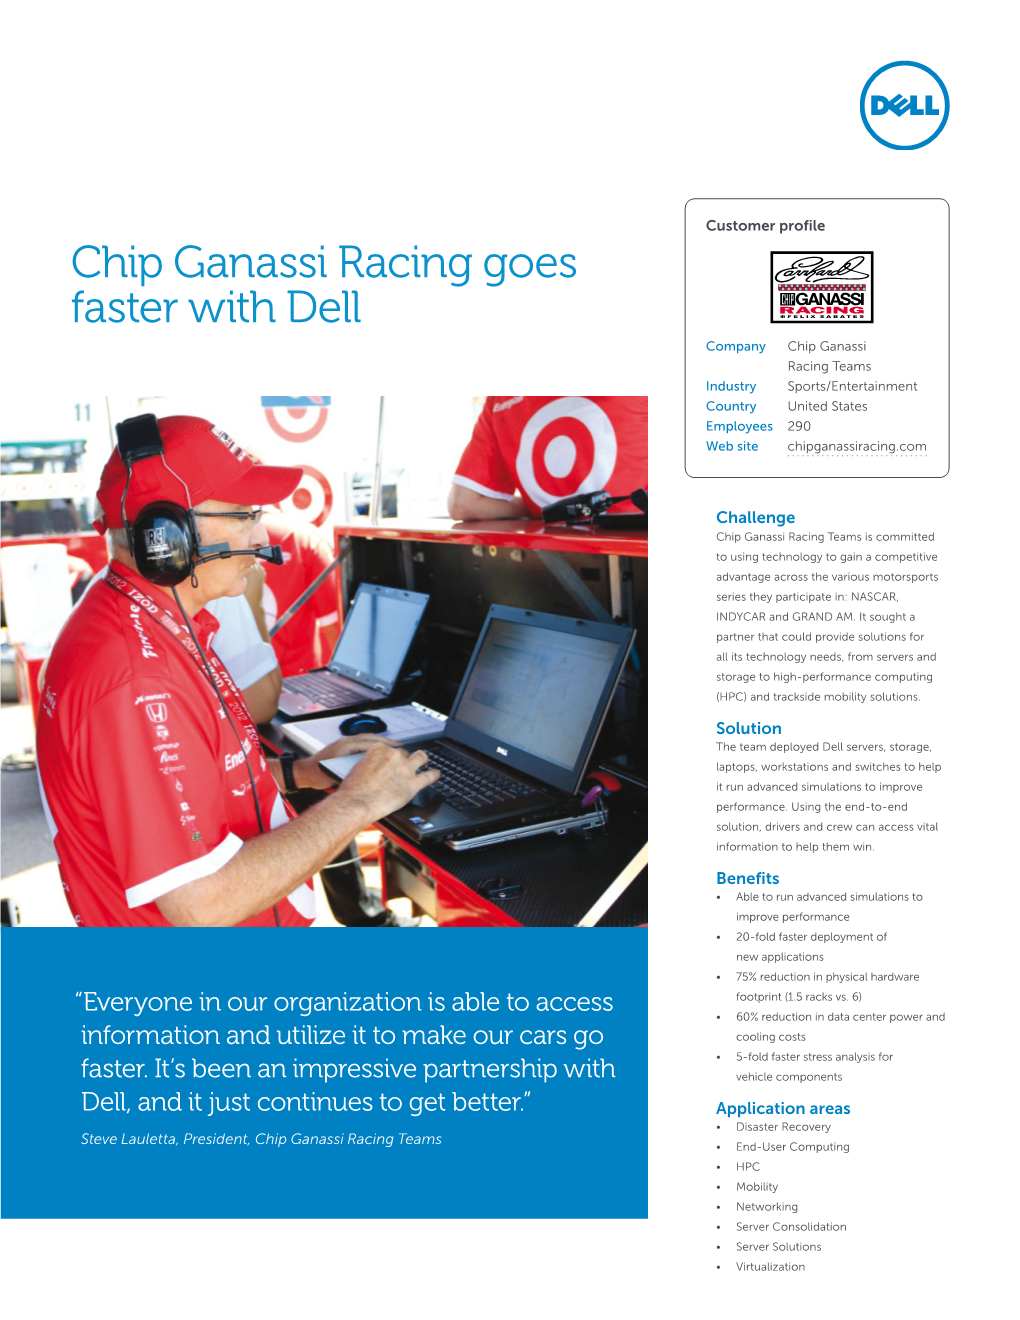 Chip Ganassi Racing Goes Faster with Dell